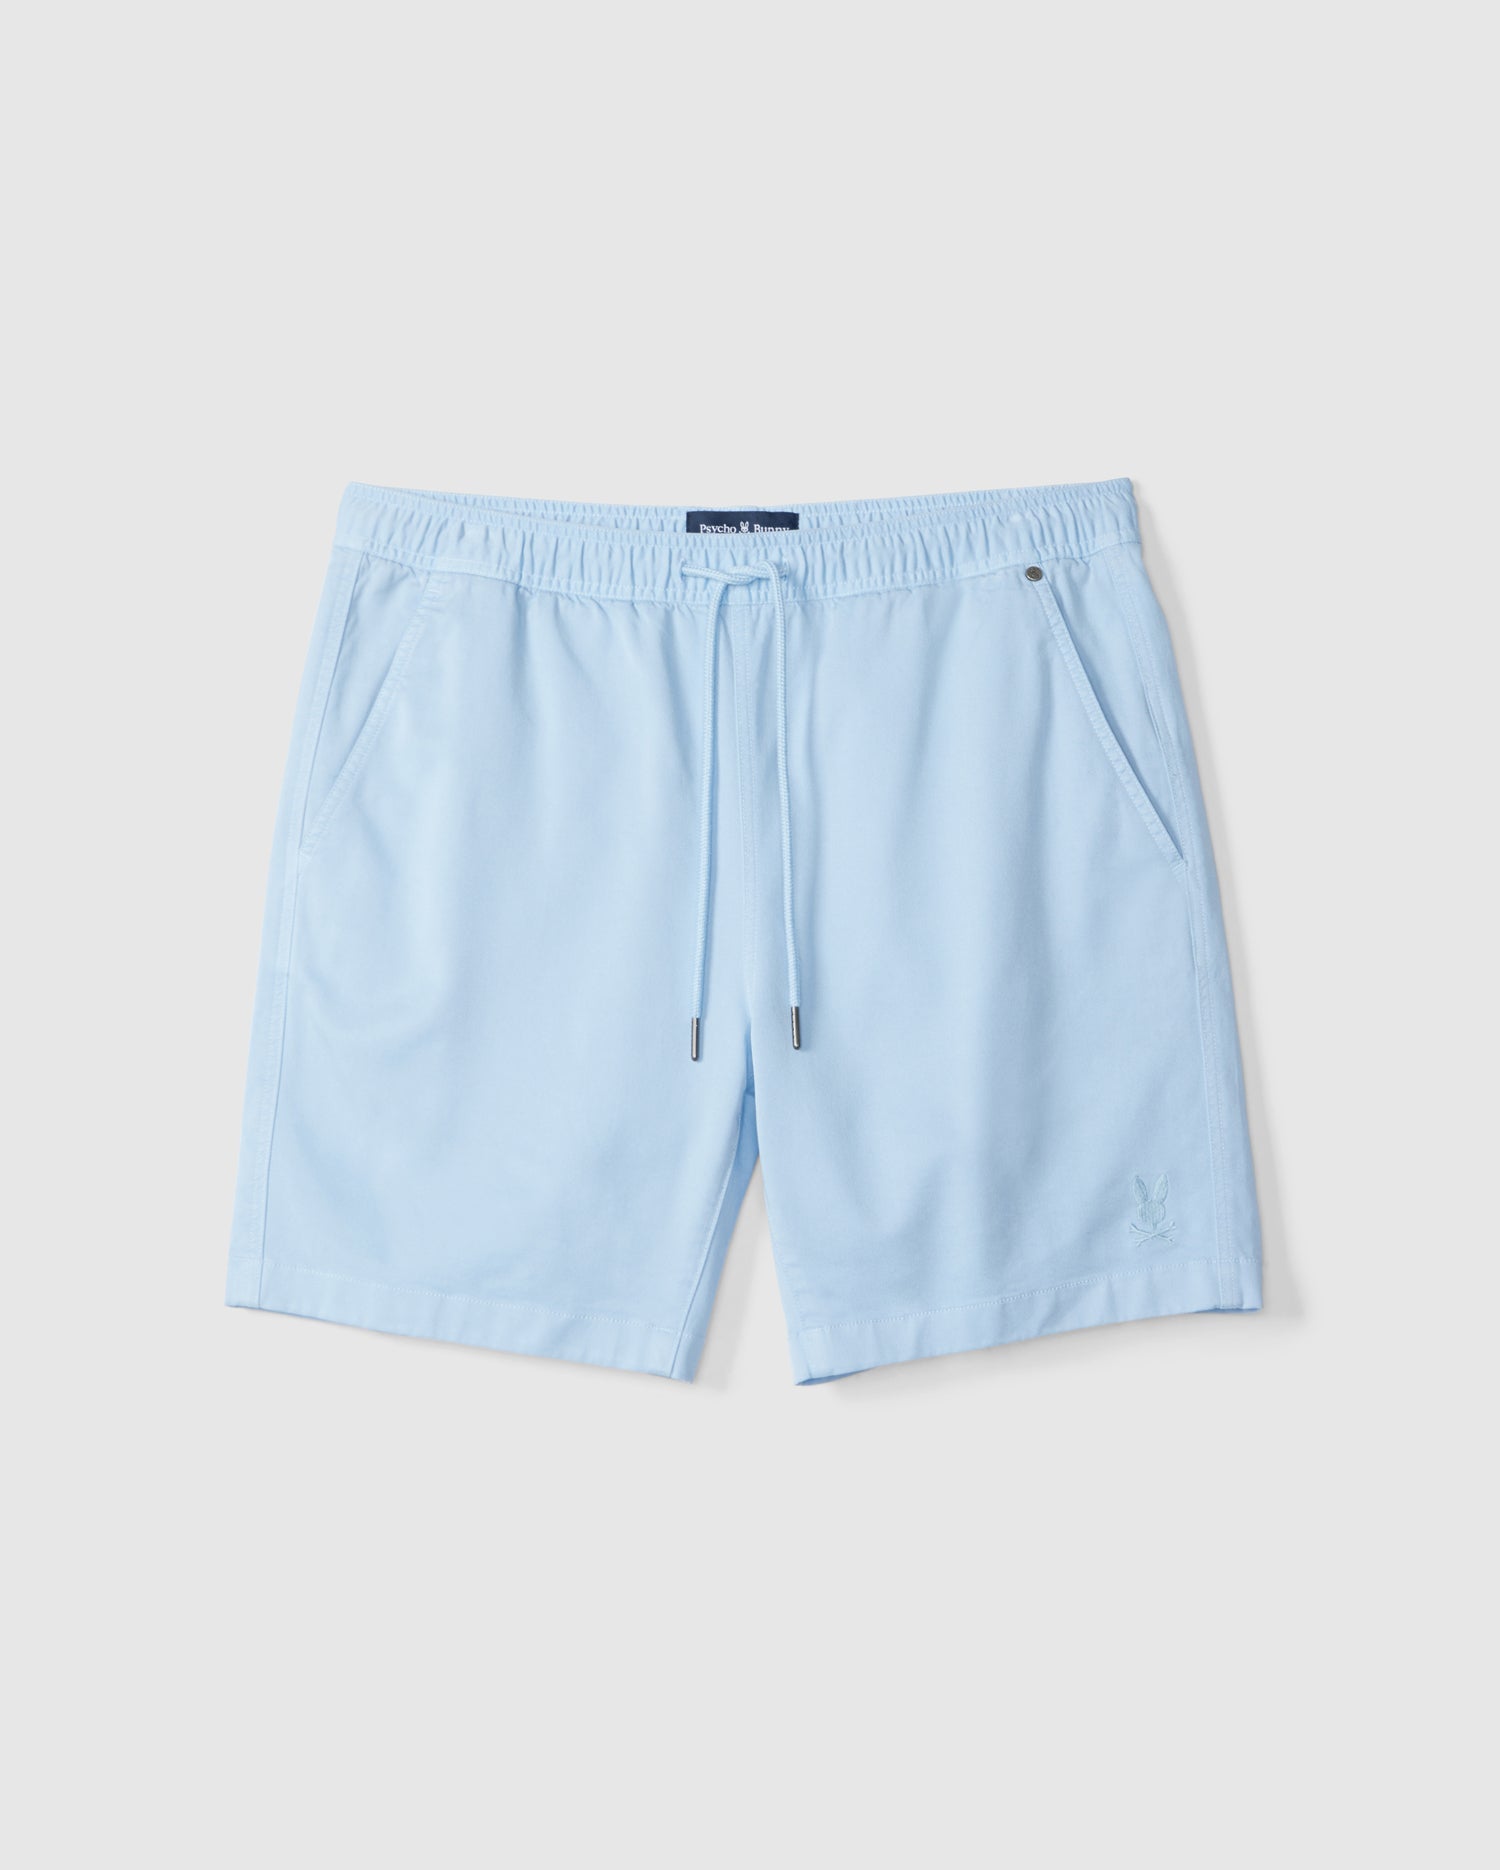 Light blue swim shorts with an elastic waistband and drawstring, displayed on a plain white background. The left leg features a small, dark embroidered logo of the MENS WILLIS STRETCH TENCEL SHORT from Psycho Bunny.